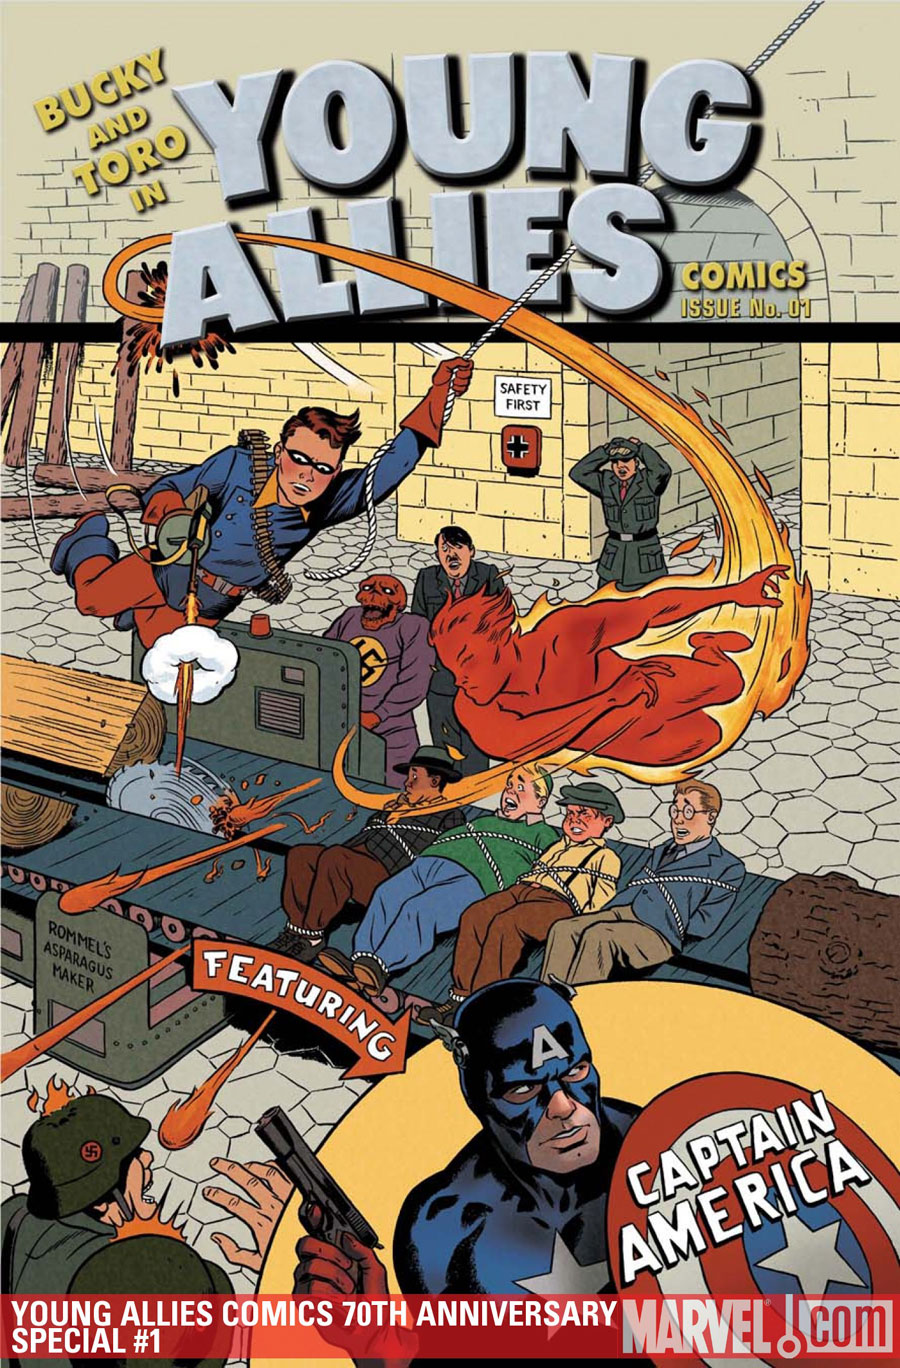 YOUNG ALLIES COMICS #1 70TH ANNIVERSARY SPECIAL